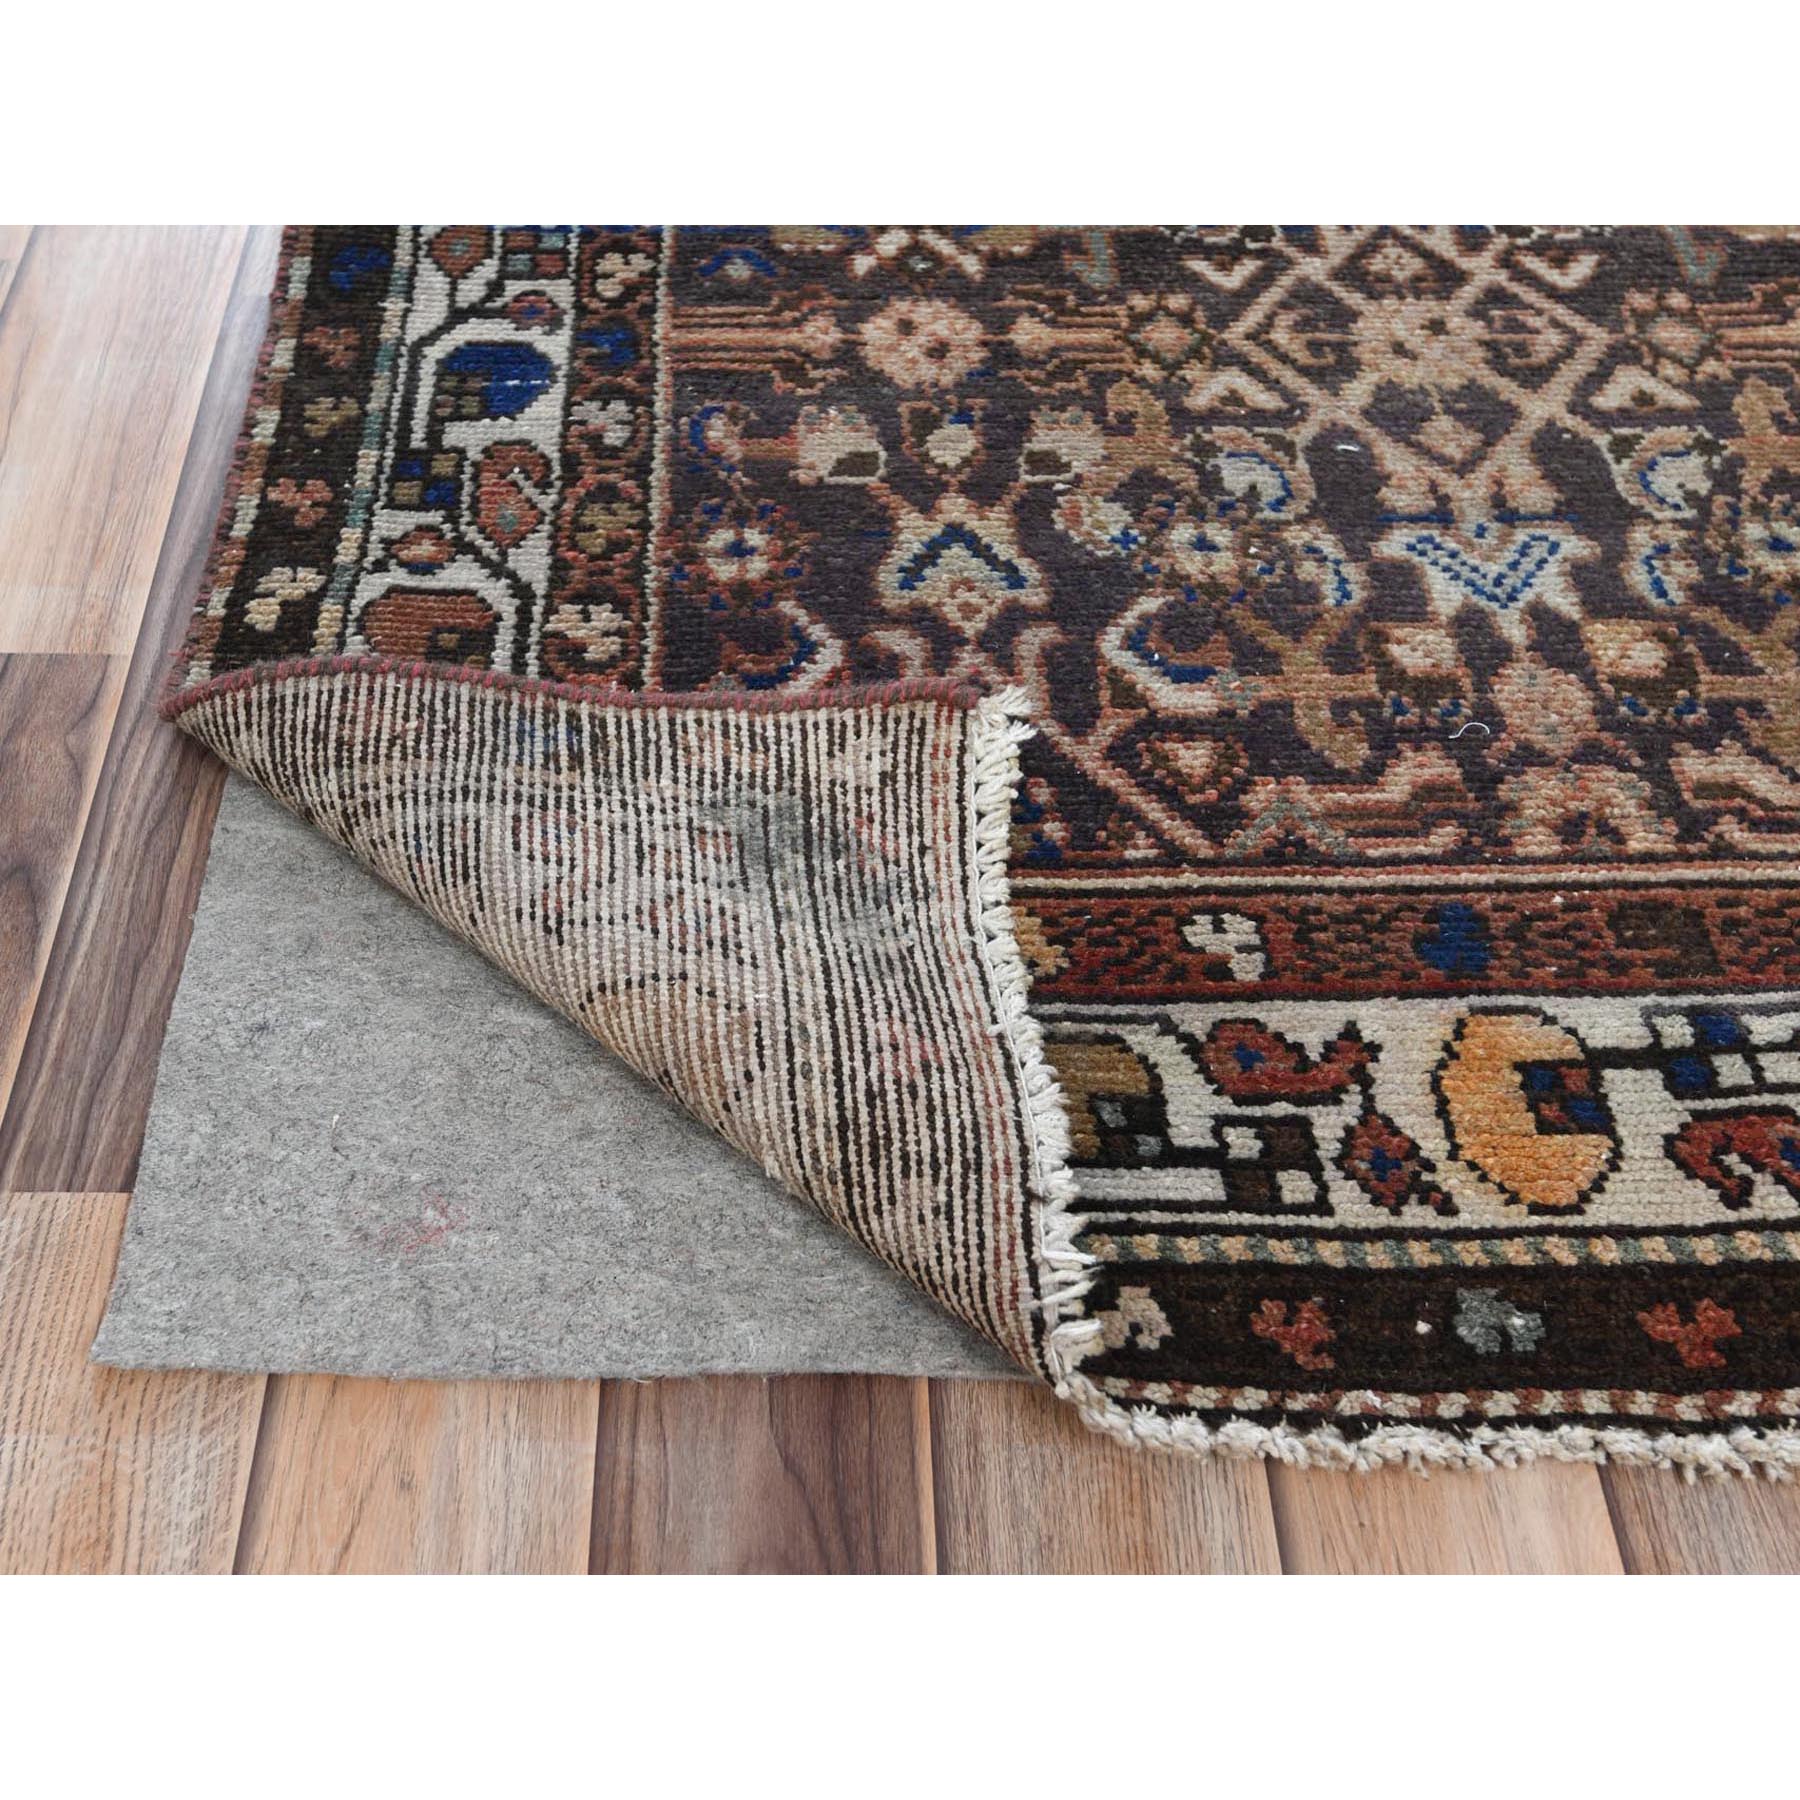 3'5"x9'2" Chocolate Brown Vintage Persian Hamadan with Fish Mahi All Over Design, Abrash, Hand Woven Pure Wool, Distressed Look, Worn Down Wide Runner Oriental Rug 